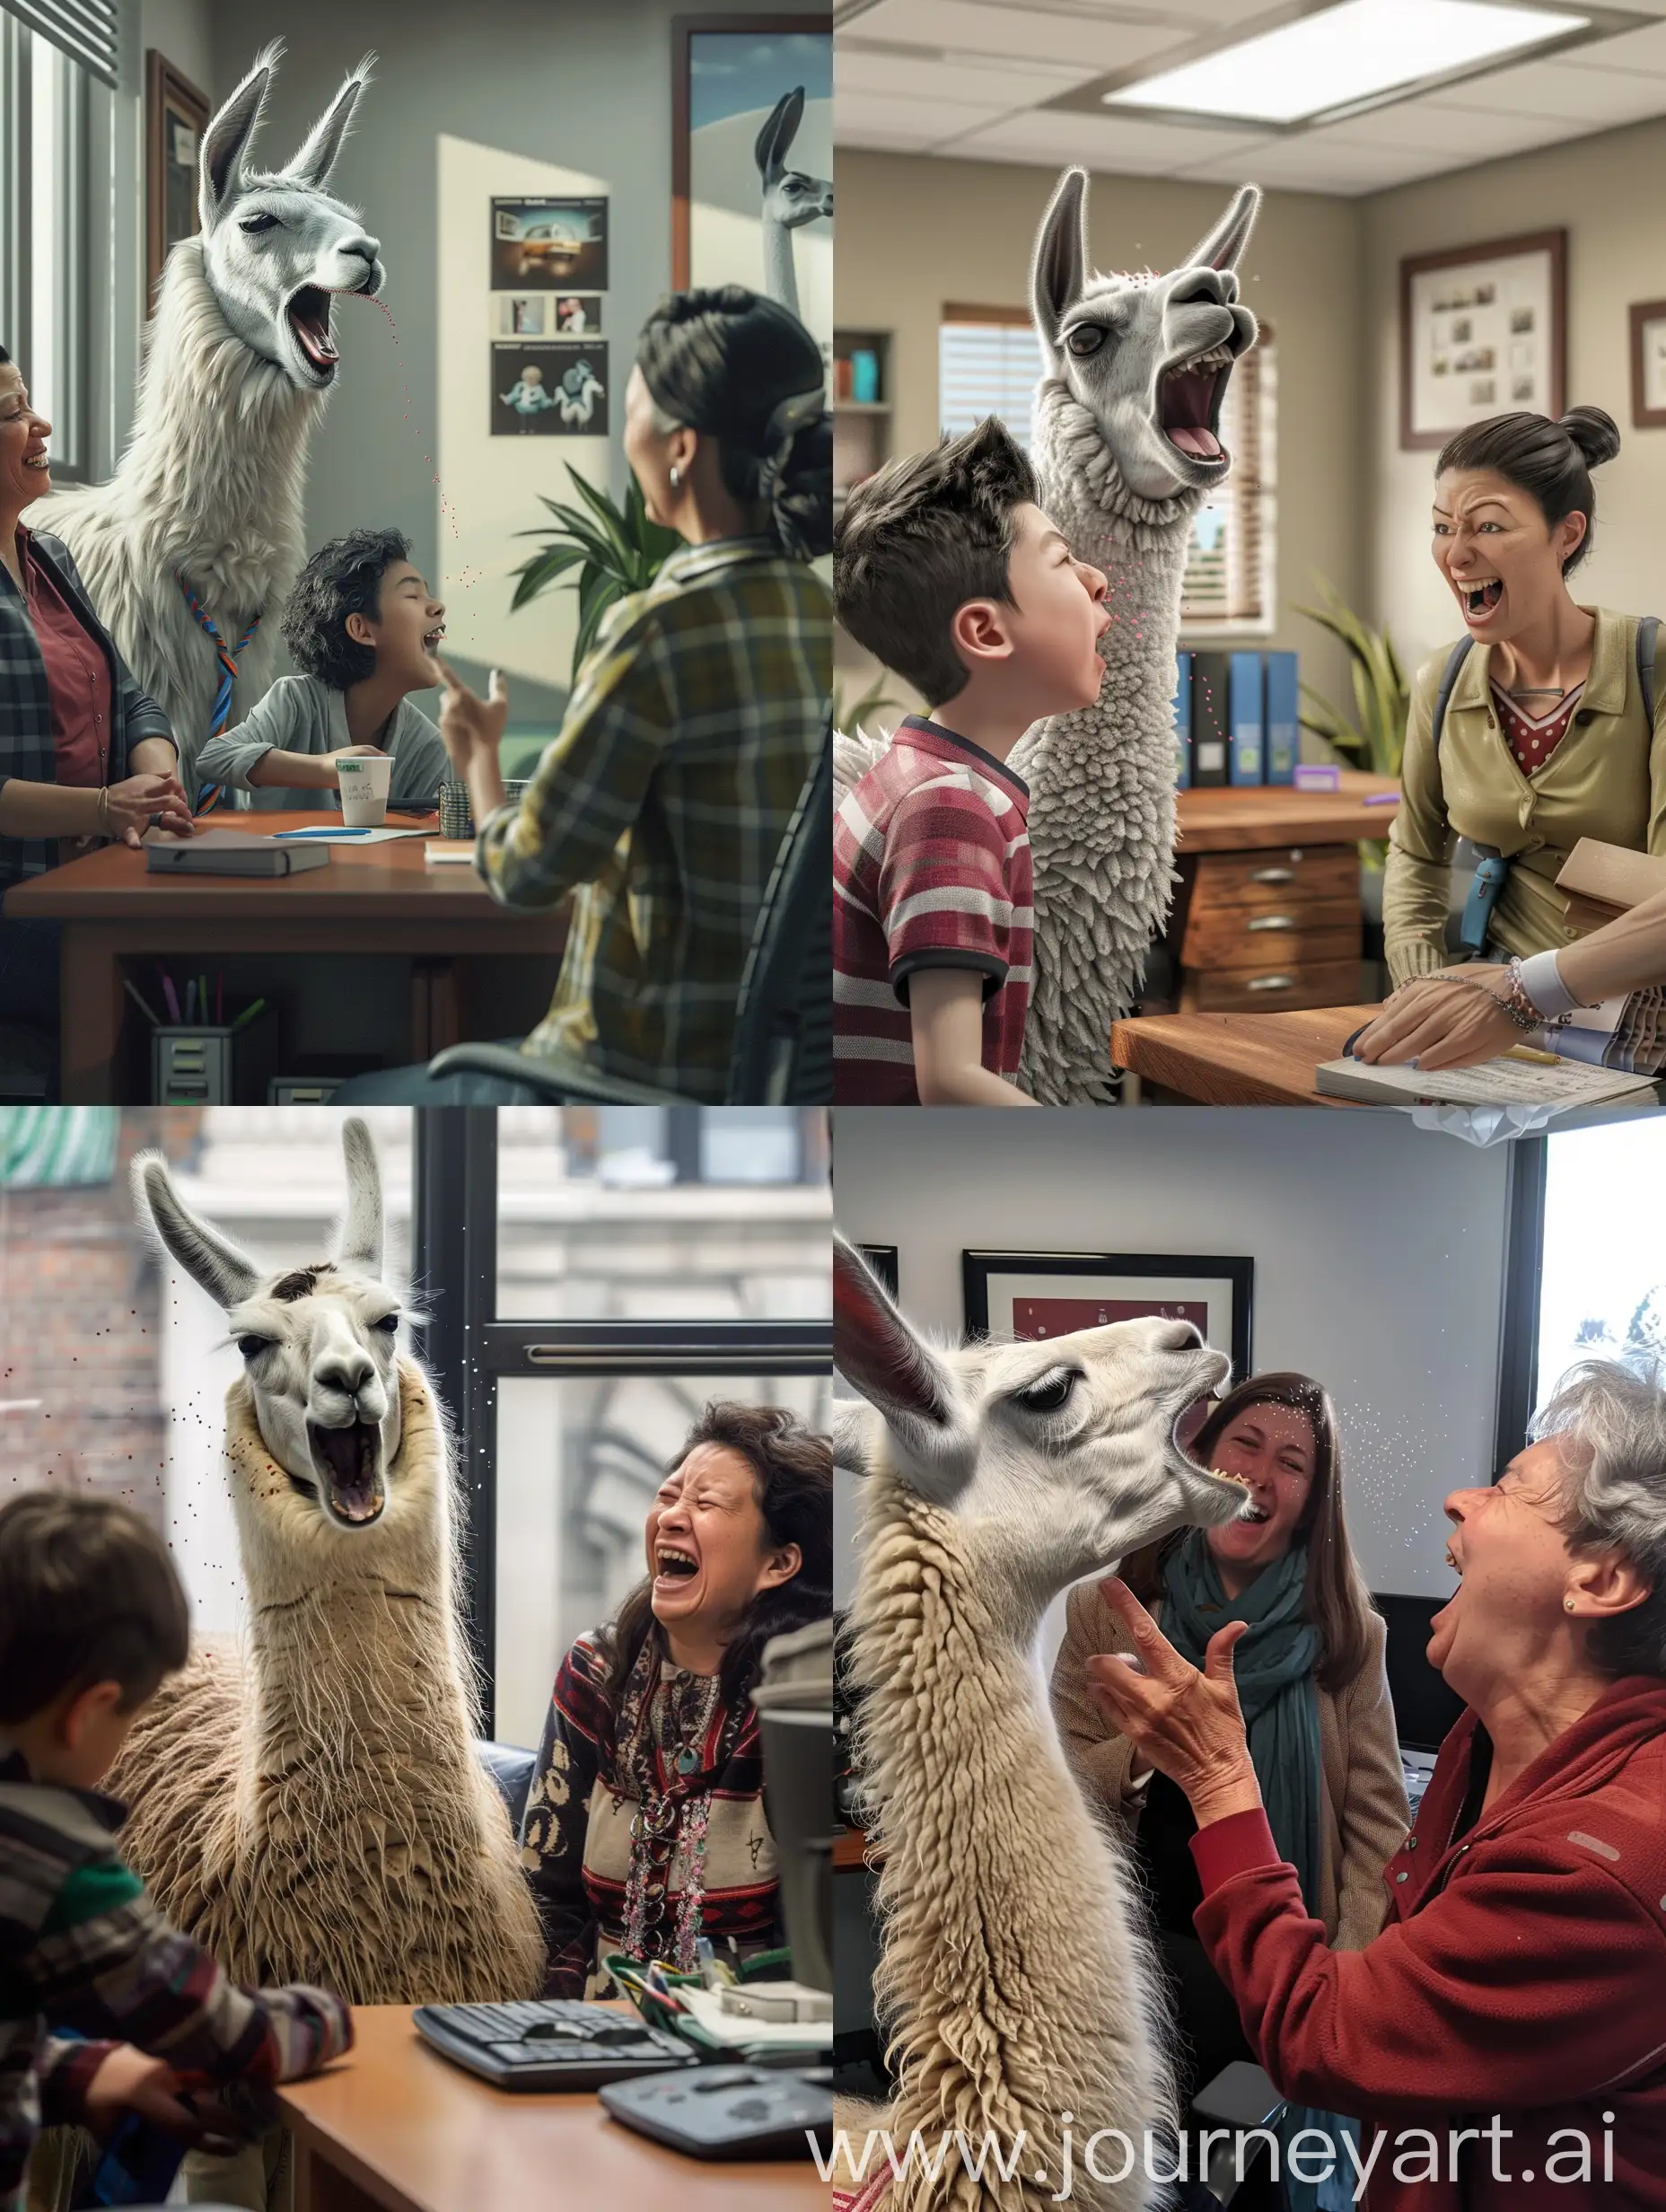 Llama-Spits-on-Boy-in-Office-while-Aunt-Laughs-Realistic-Scene-with-Llama-in-Girl-Clothes